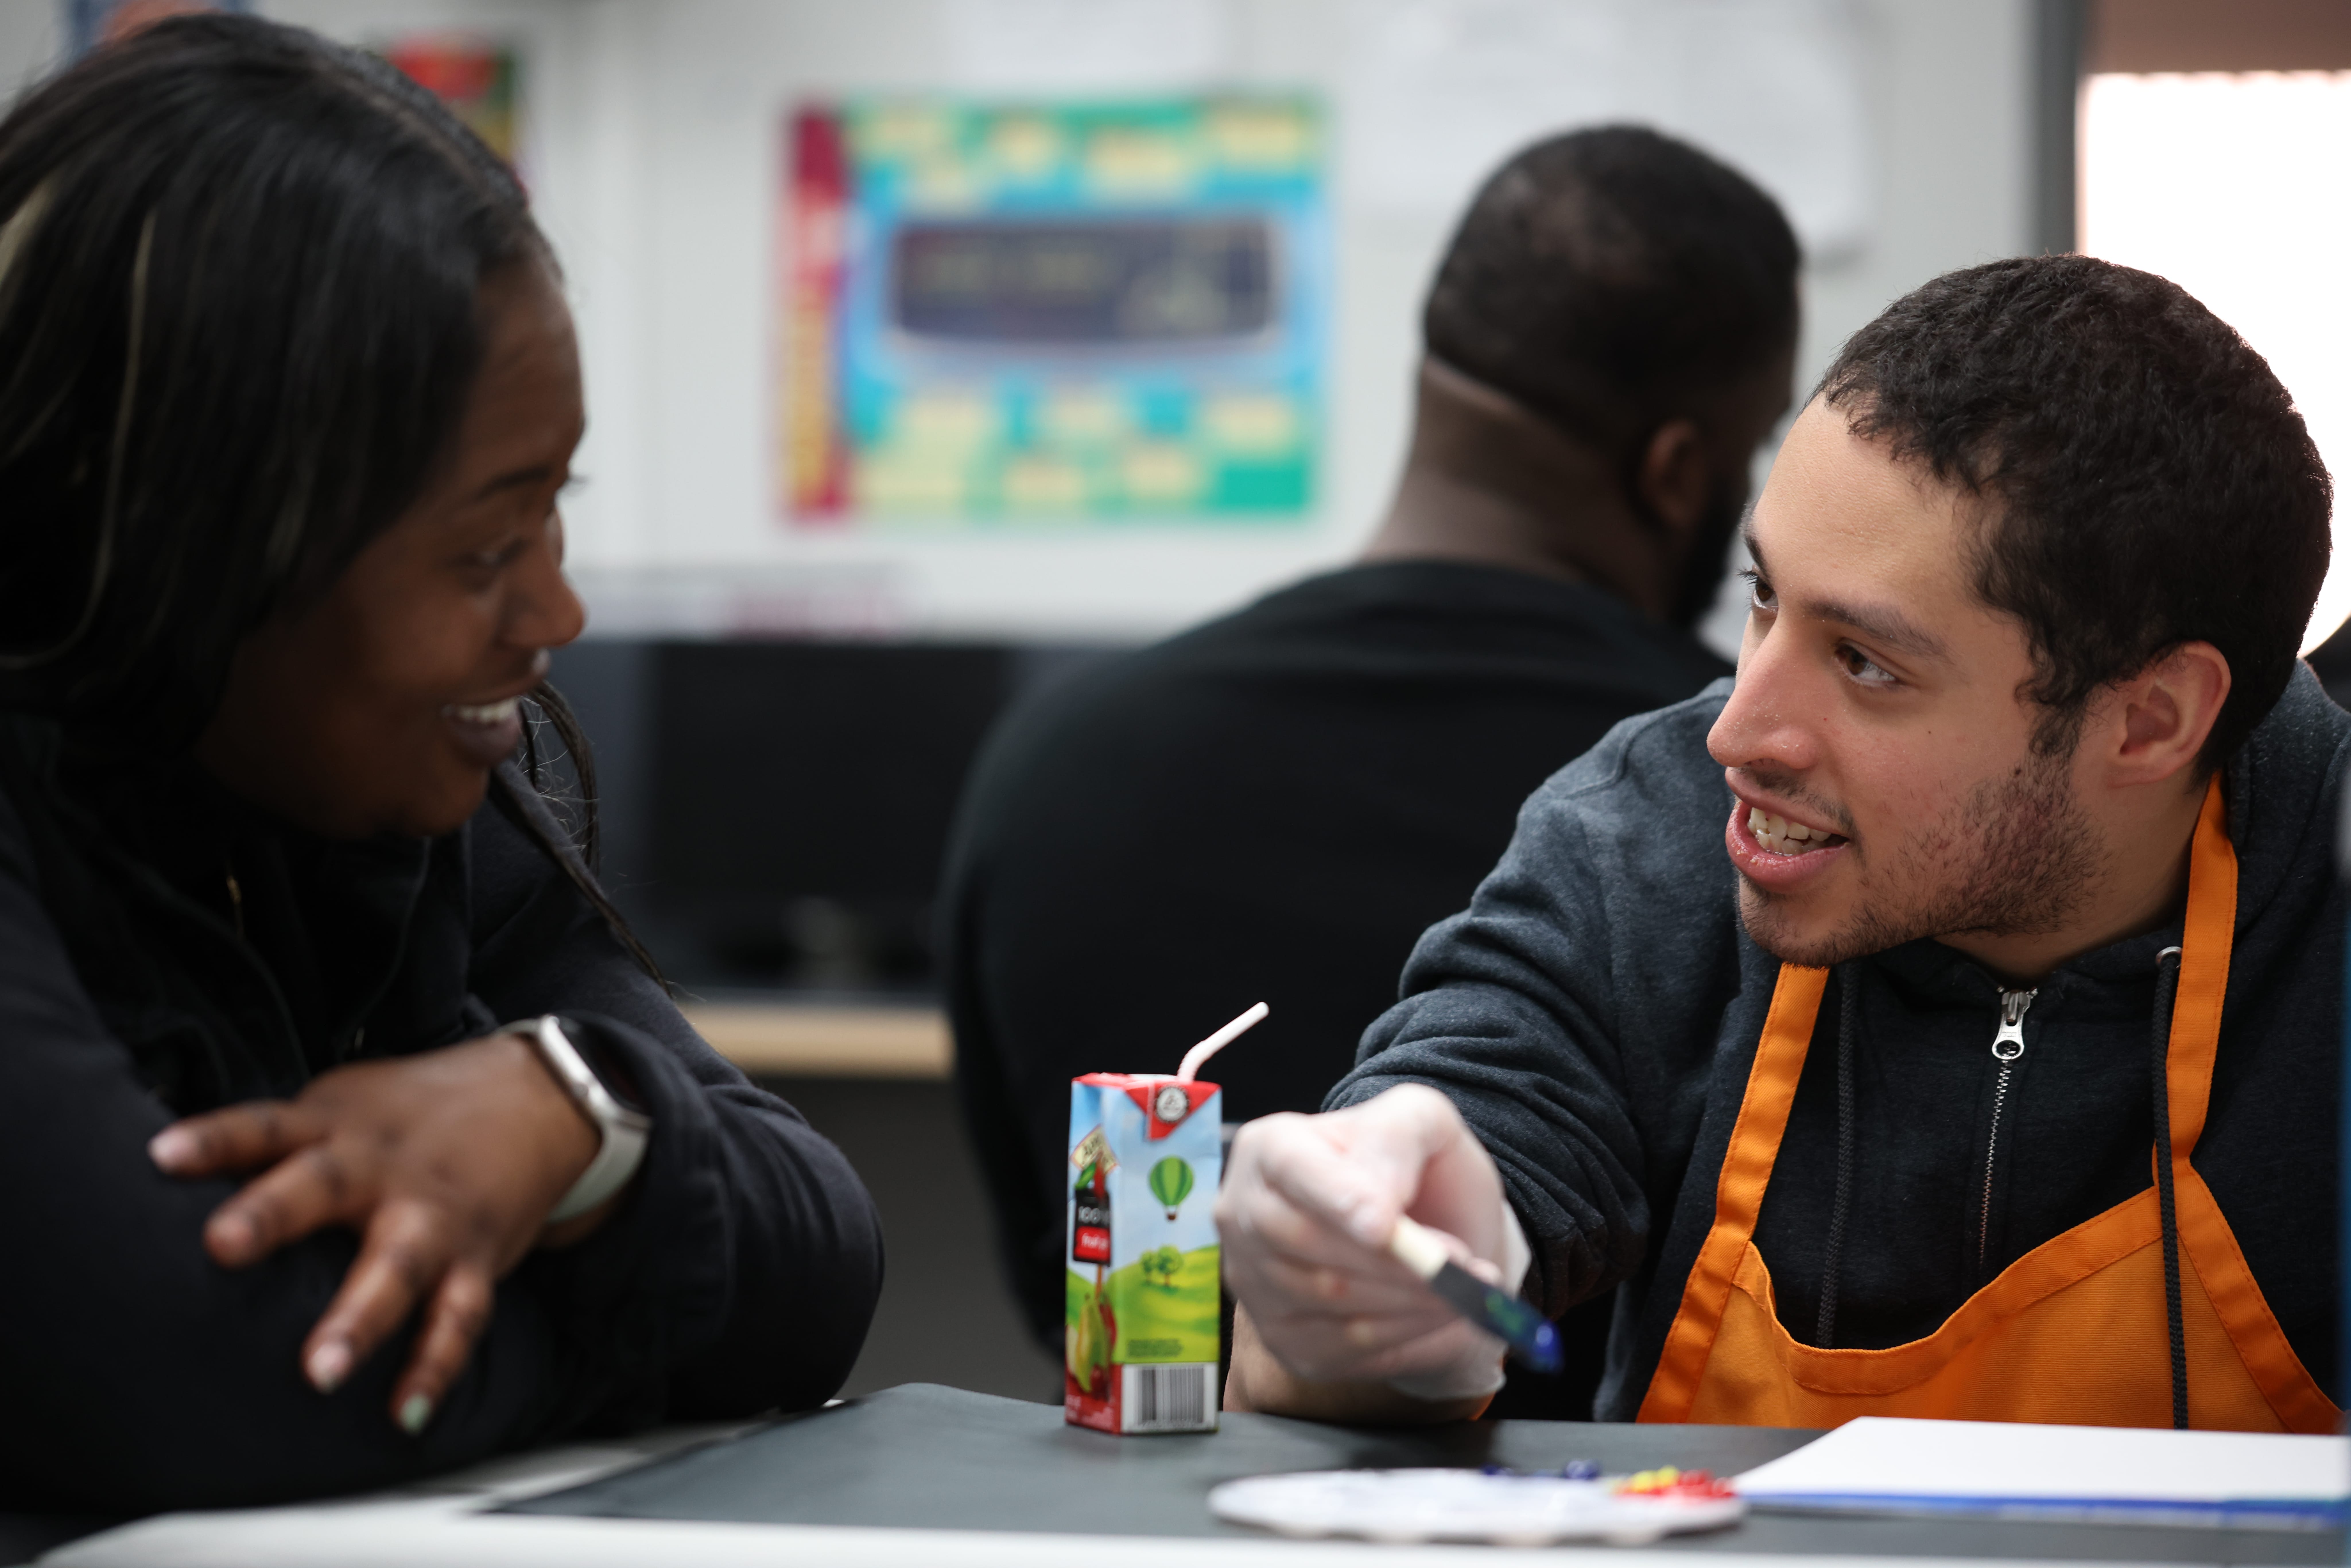 A direct support professional and program participant enjoying a conversation.